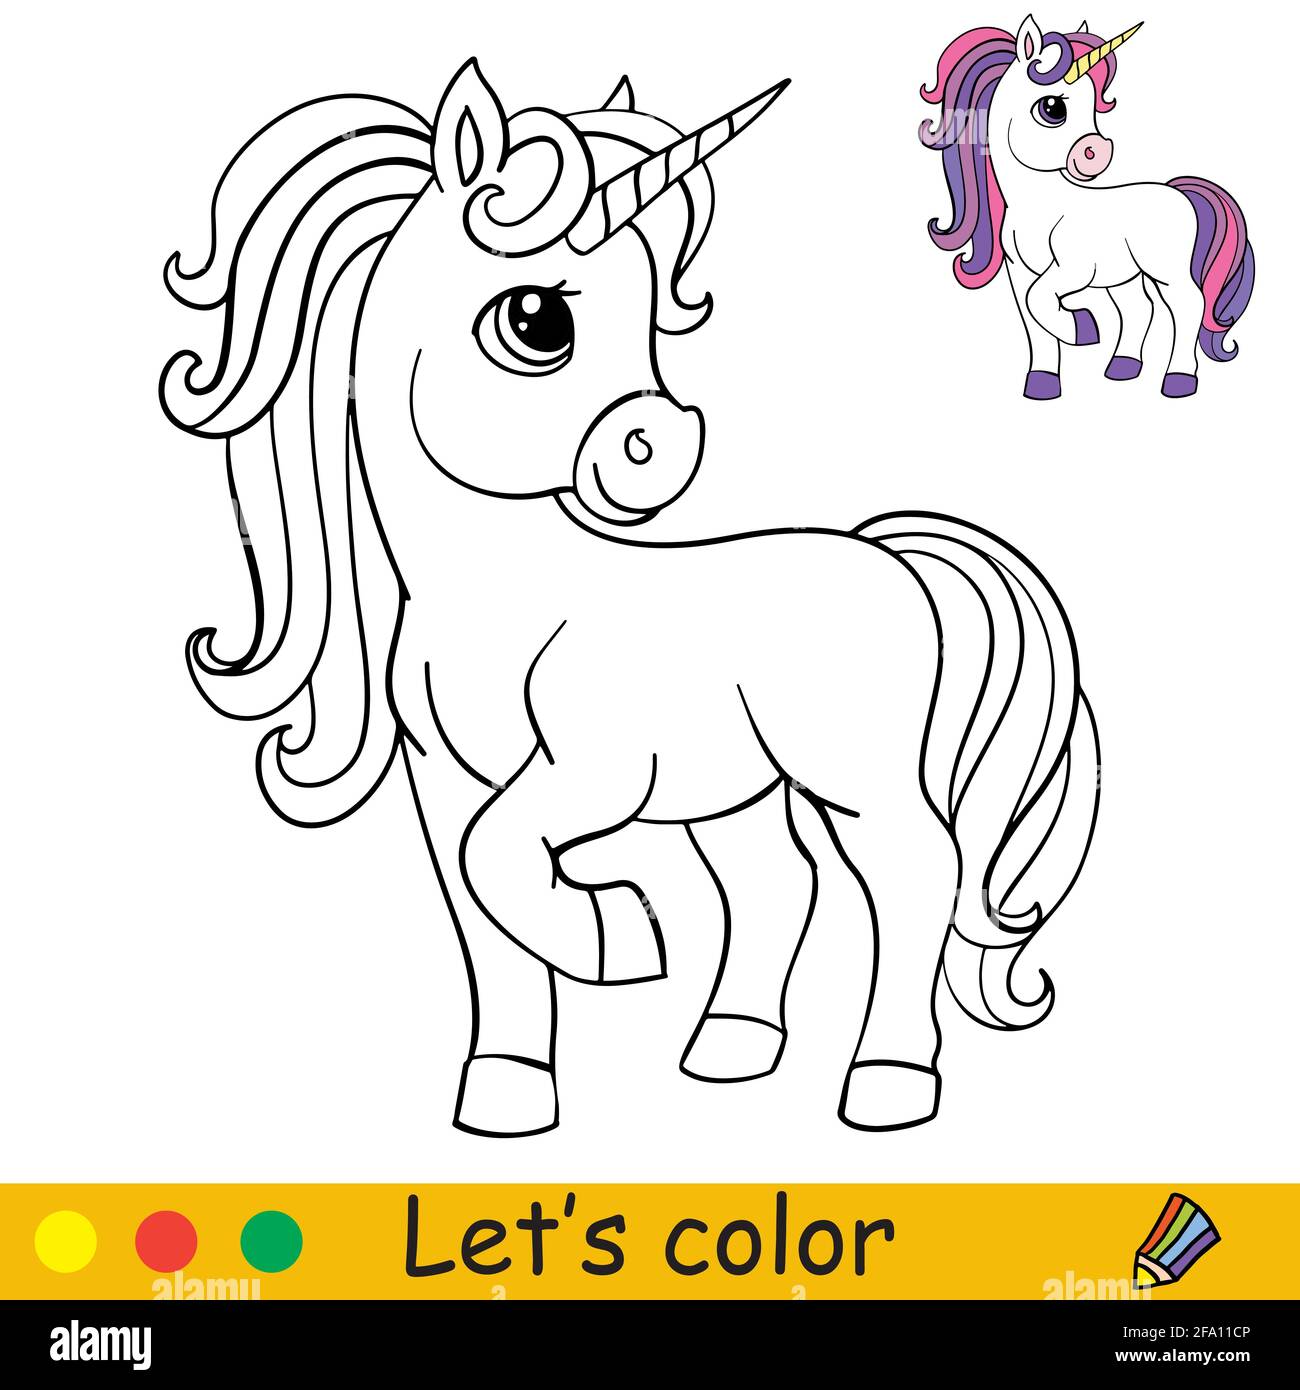 Cute standing cartoon unicorn. Coloring book page with colorful ...